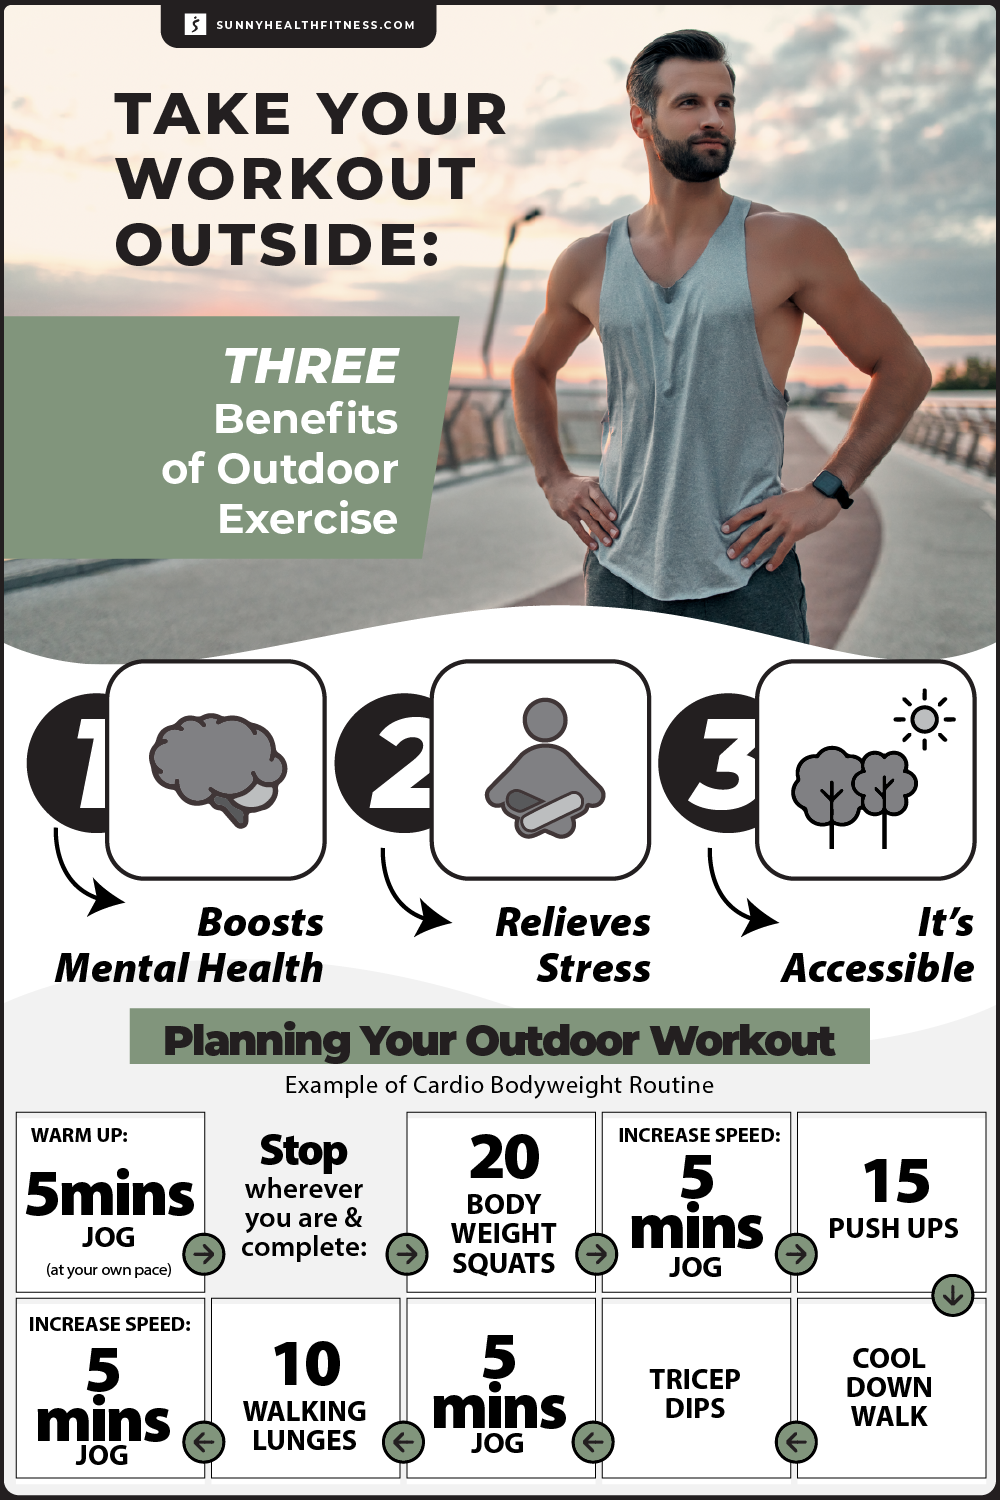 Take Your Workout Outside: 3 Benefits of Outdoor Exercise